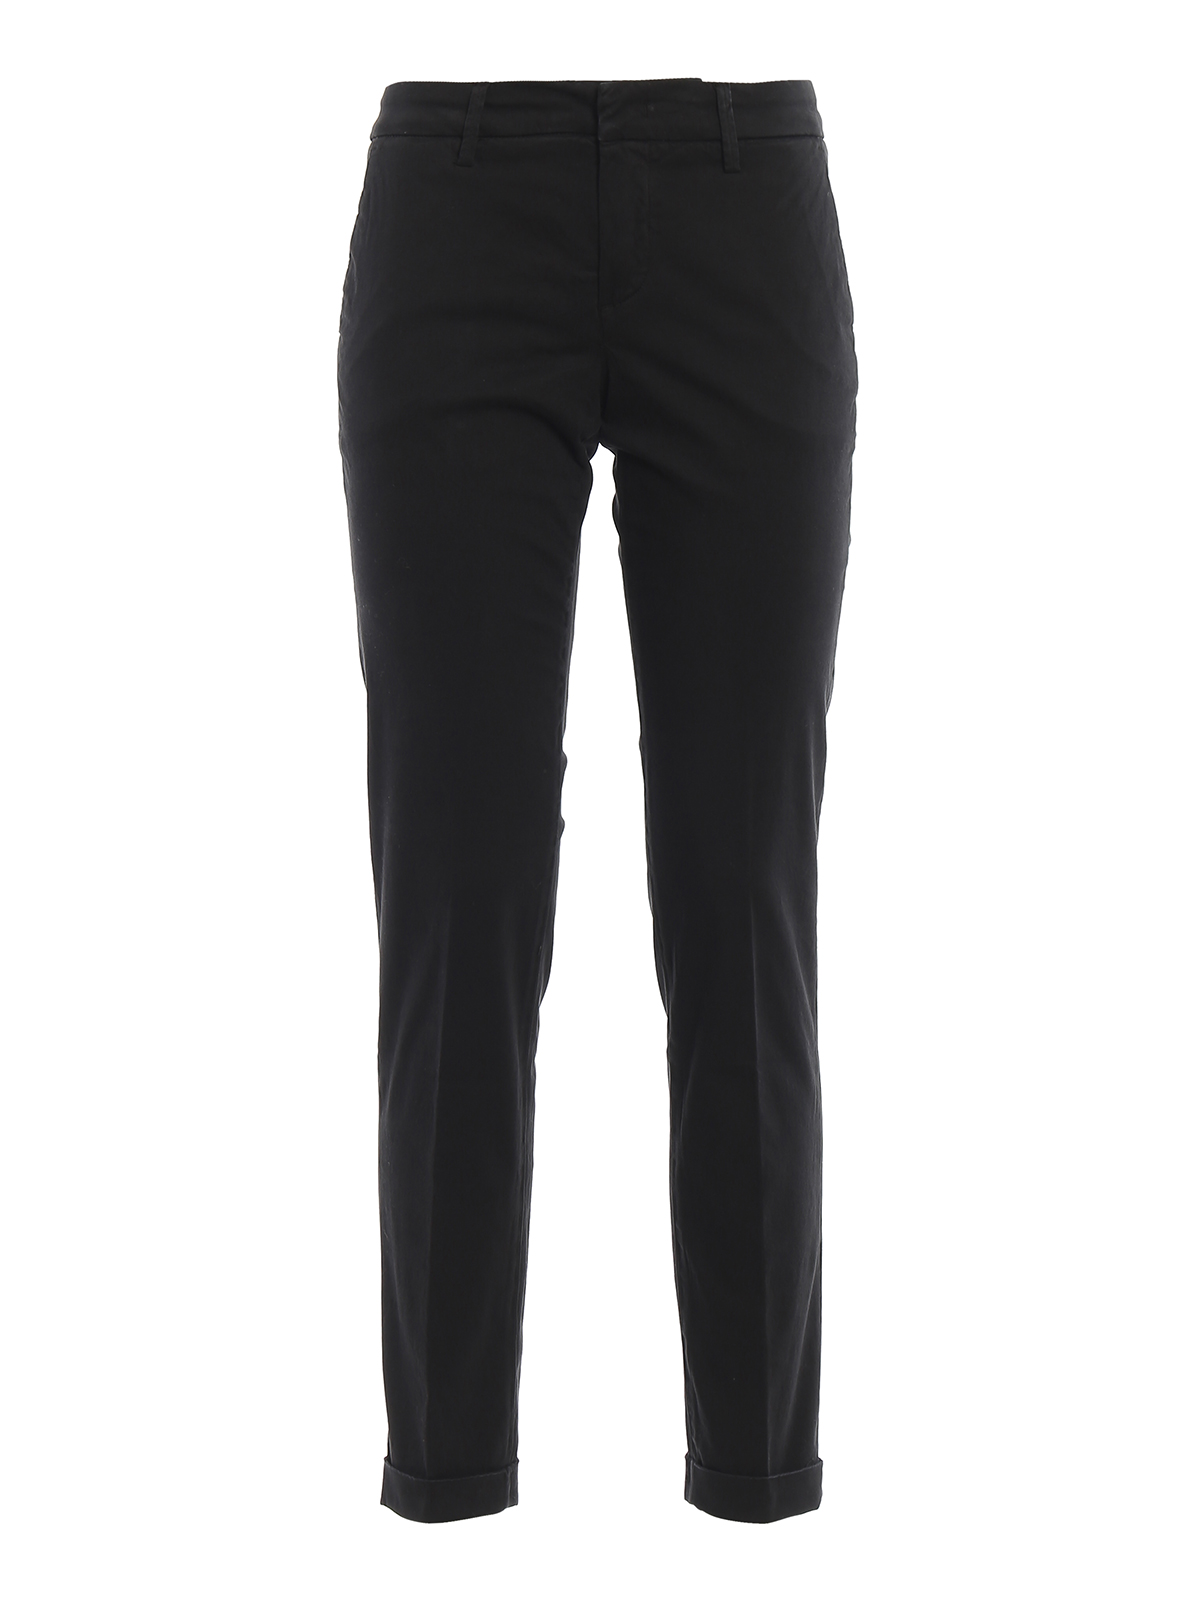 FAY PEACHED COTTON BLACK TROUSERS